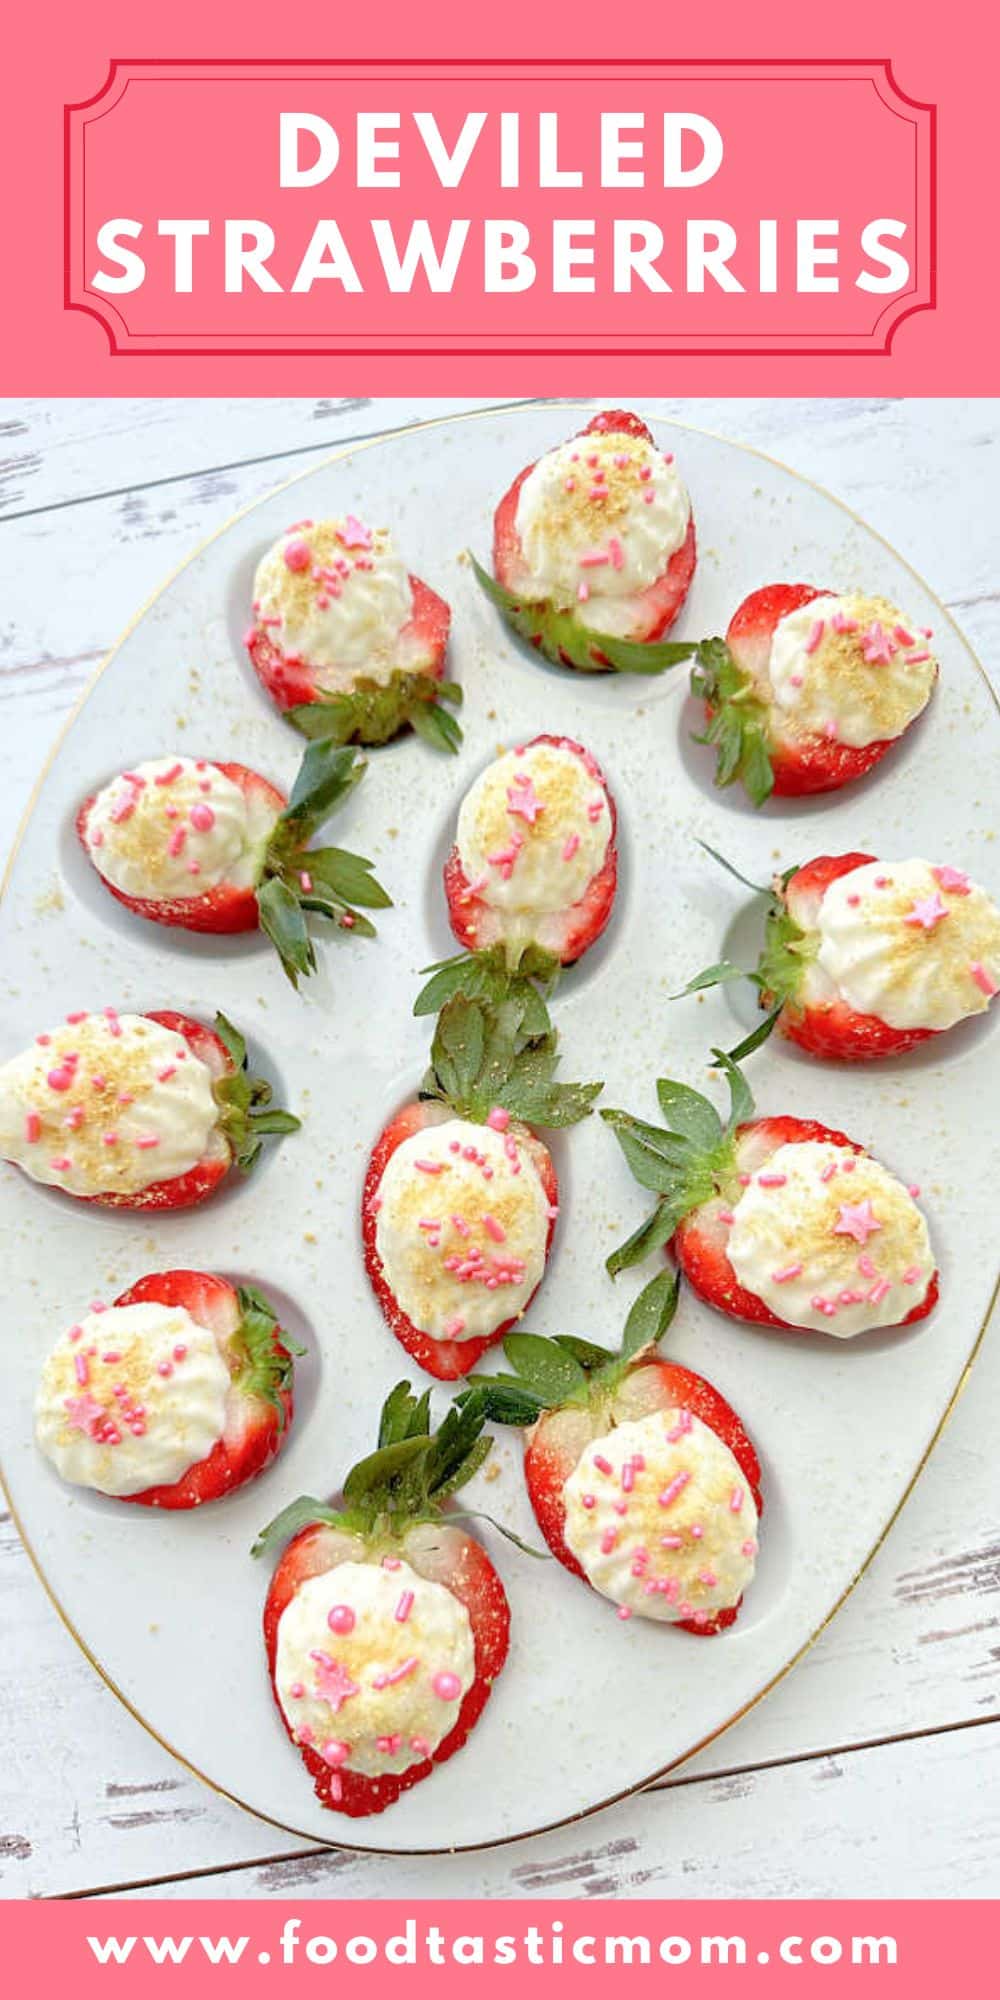 Try filling your deviled egg platter with juicy strawberries! This yummy dessert combines fresh berries with a creamy cheesecake filling. via @foodtasticmom